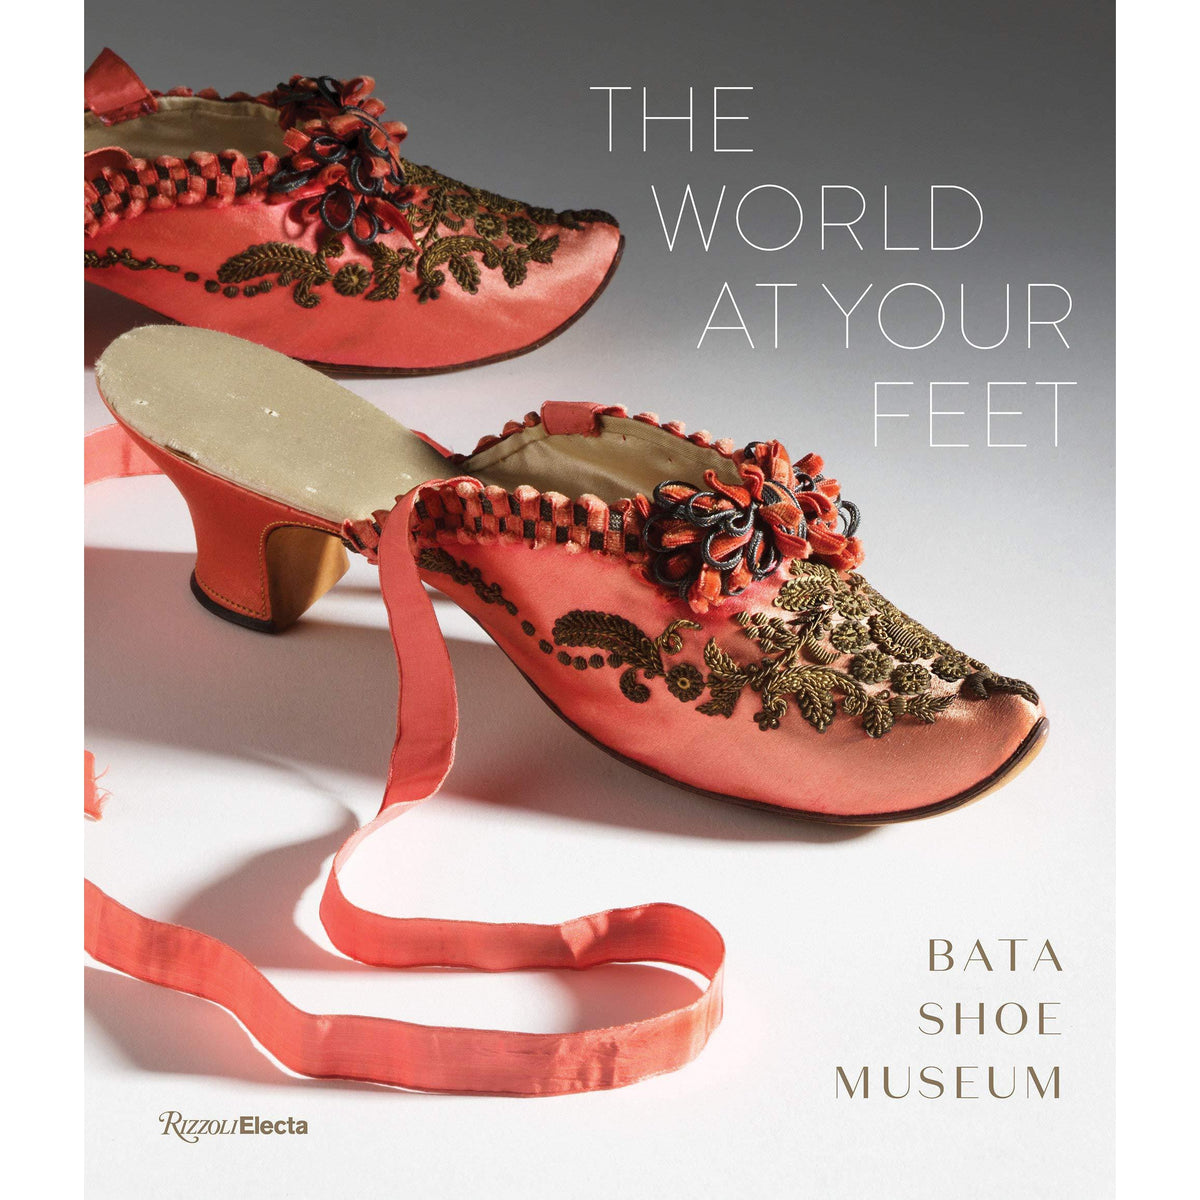 The World at your Feet: Bata Shoe Museum